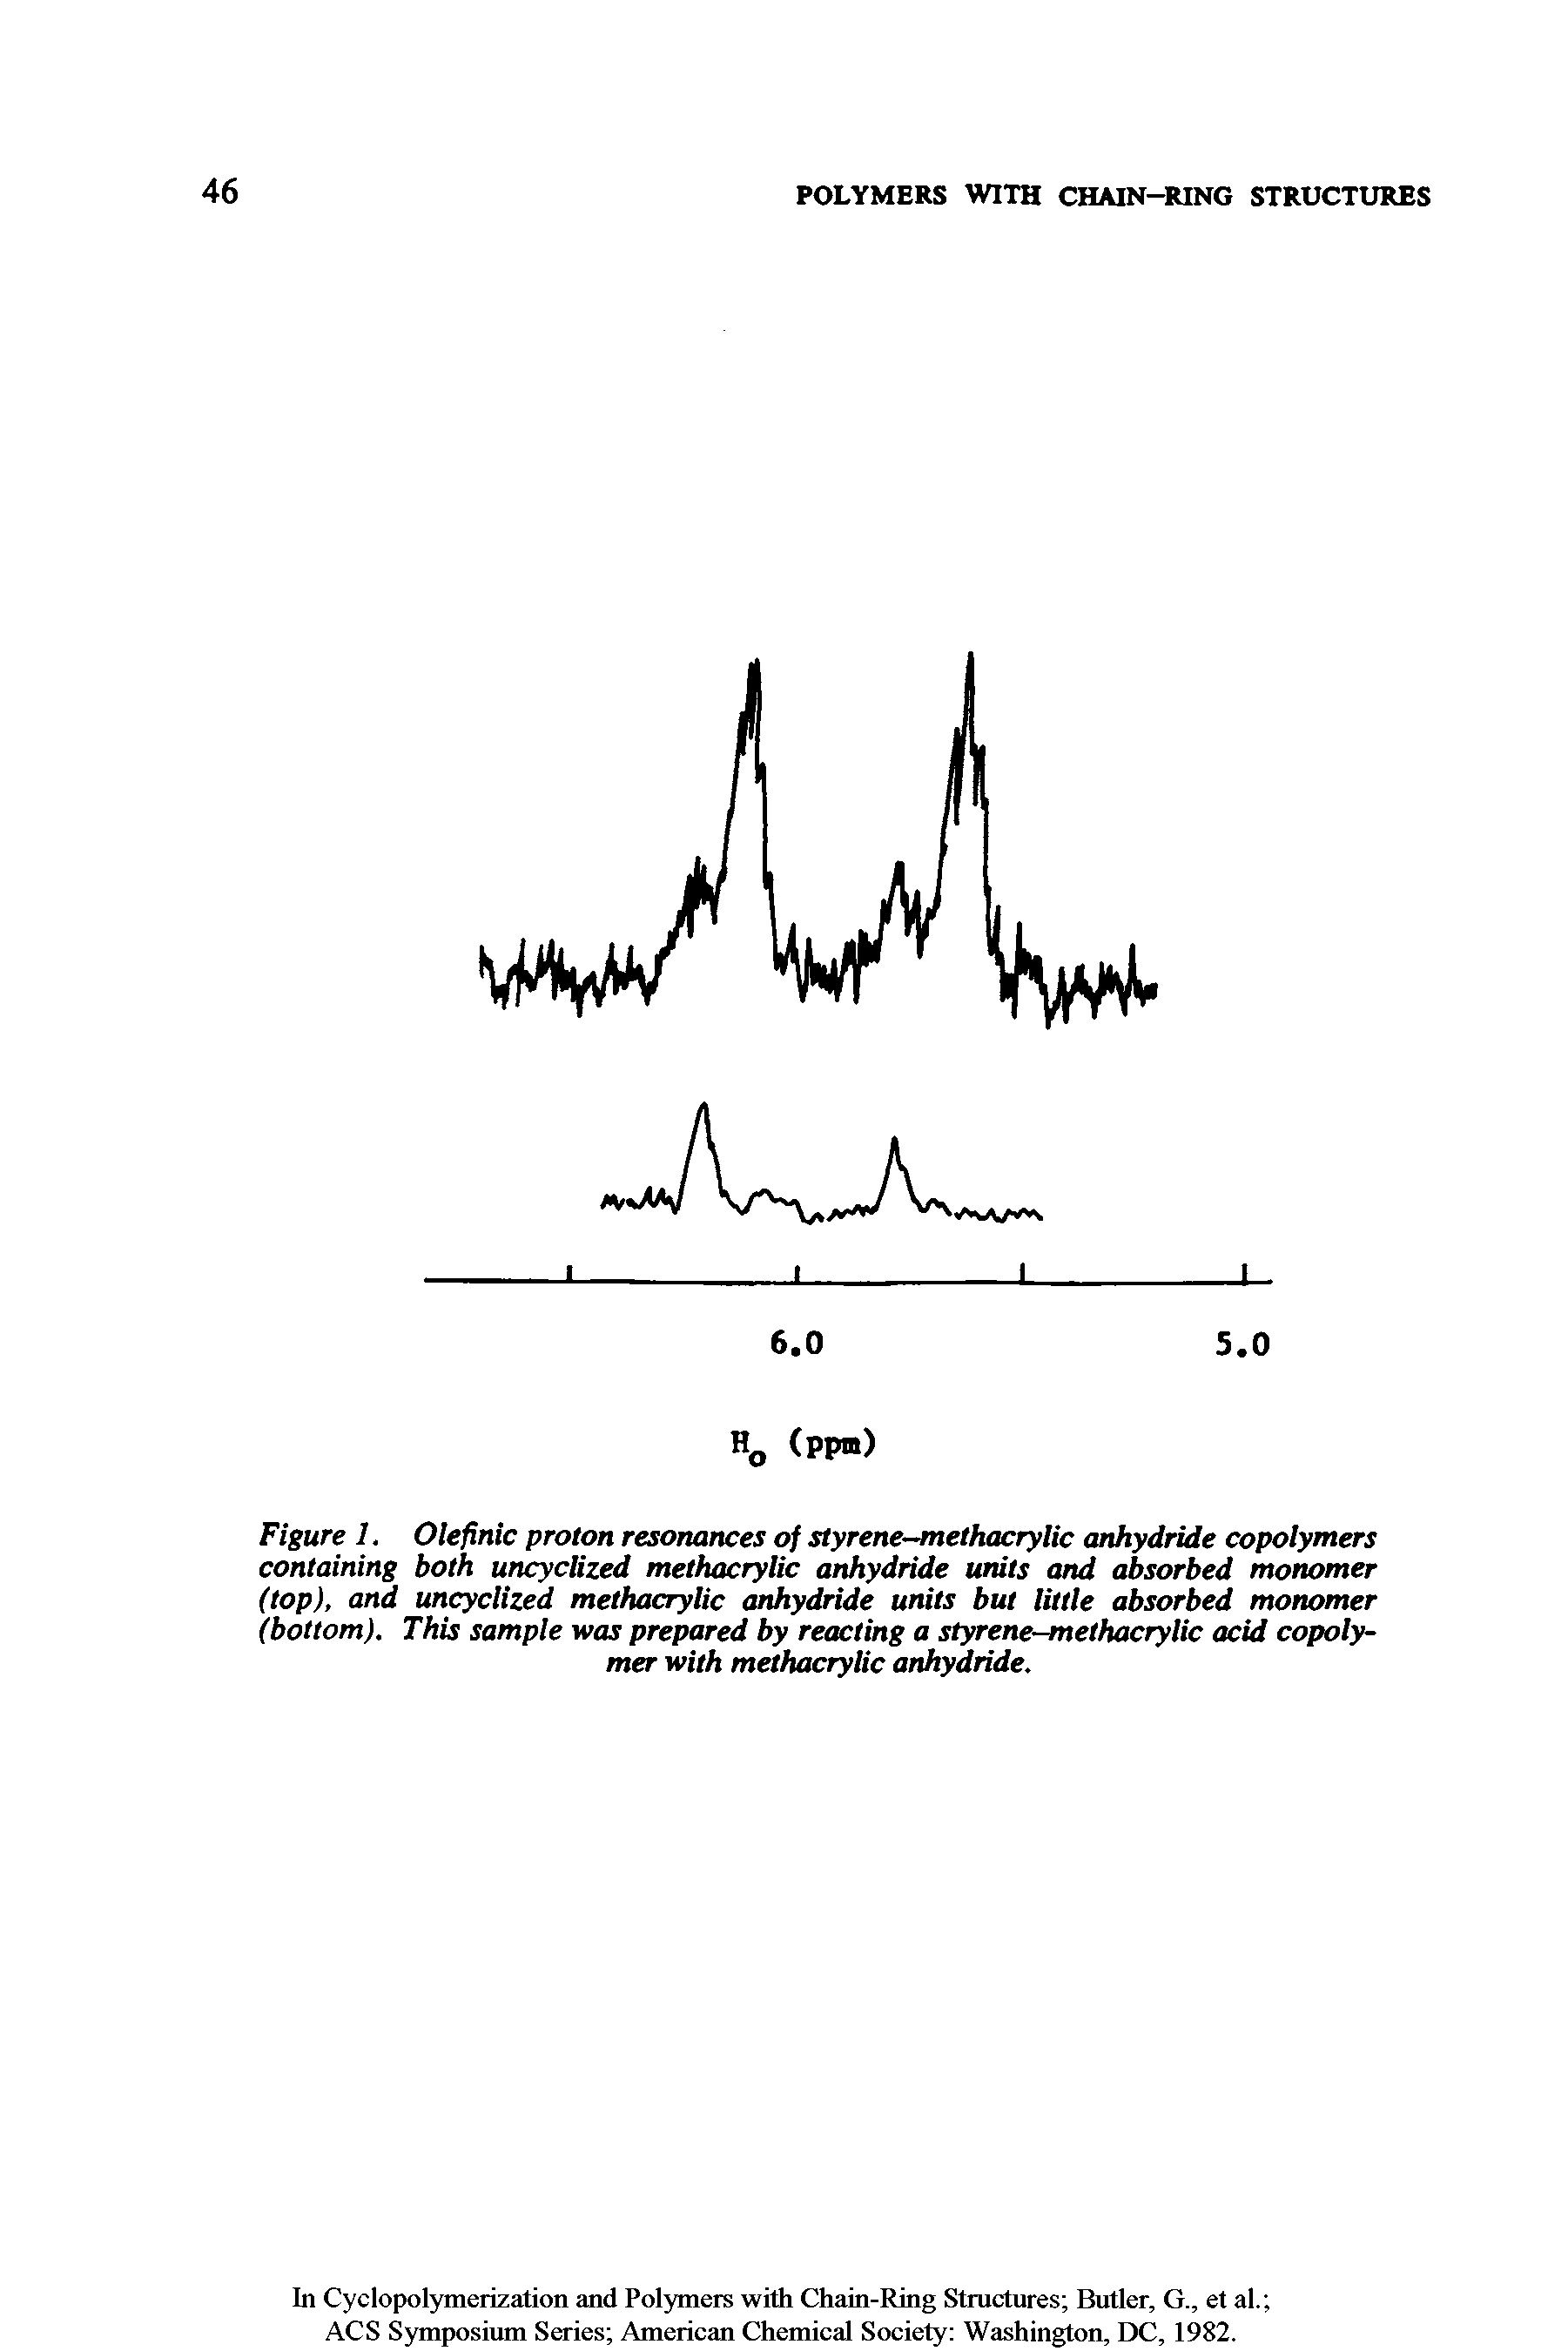 Figure 1. Olefinic proton resonances of styrene-methacrylic anhydride copolymers containing both uncycttzed methacrylic anhydride units and absorbed monomer (top), and uncyclized methacrylic anhydride units but little absorbed monomer (bottom). This sample was prepared by reacting a styrene-methacrylic acid copolymer with methacrylic anhydride.